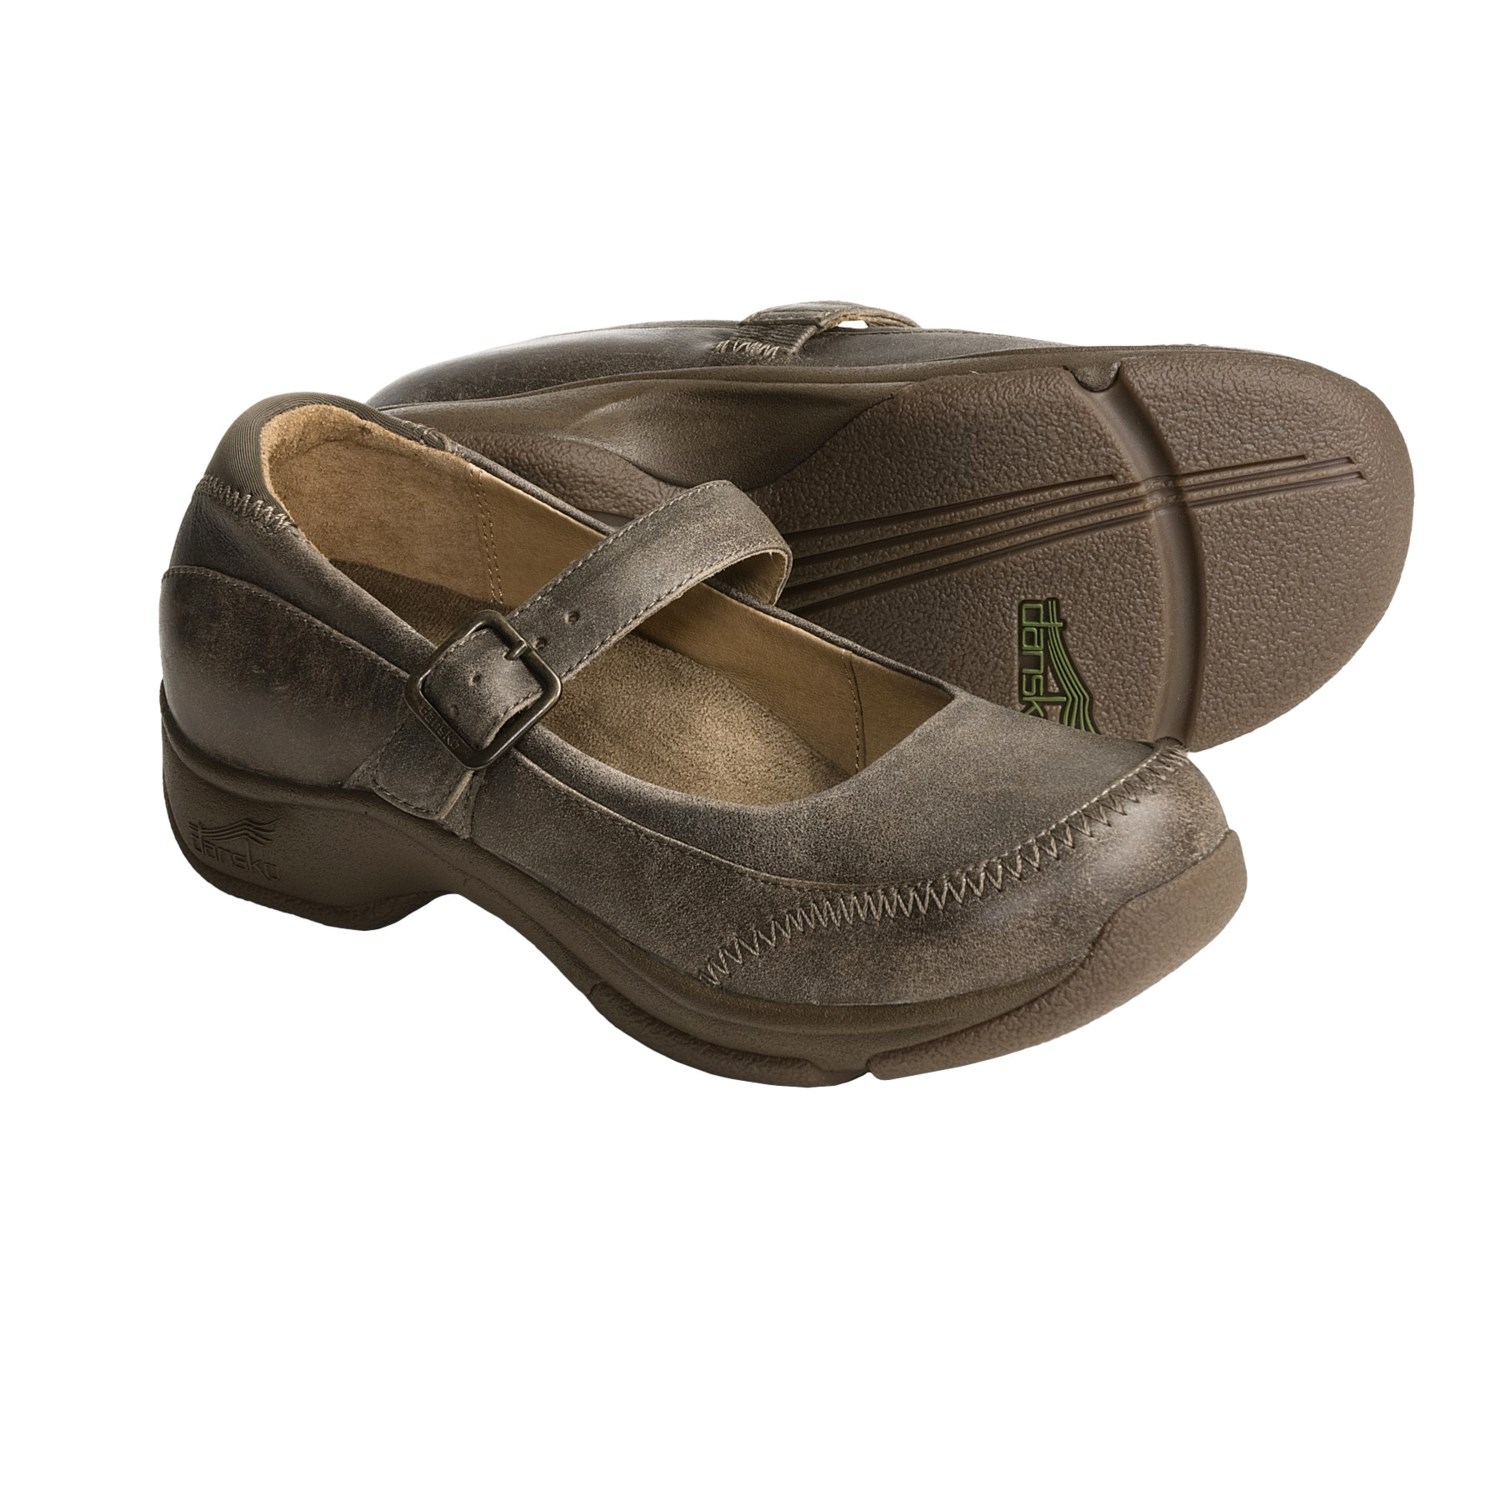 Download this Dansko Kate Mary Jane Shoes For Women Stone Distressed picture